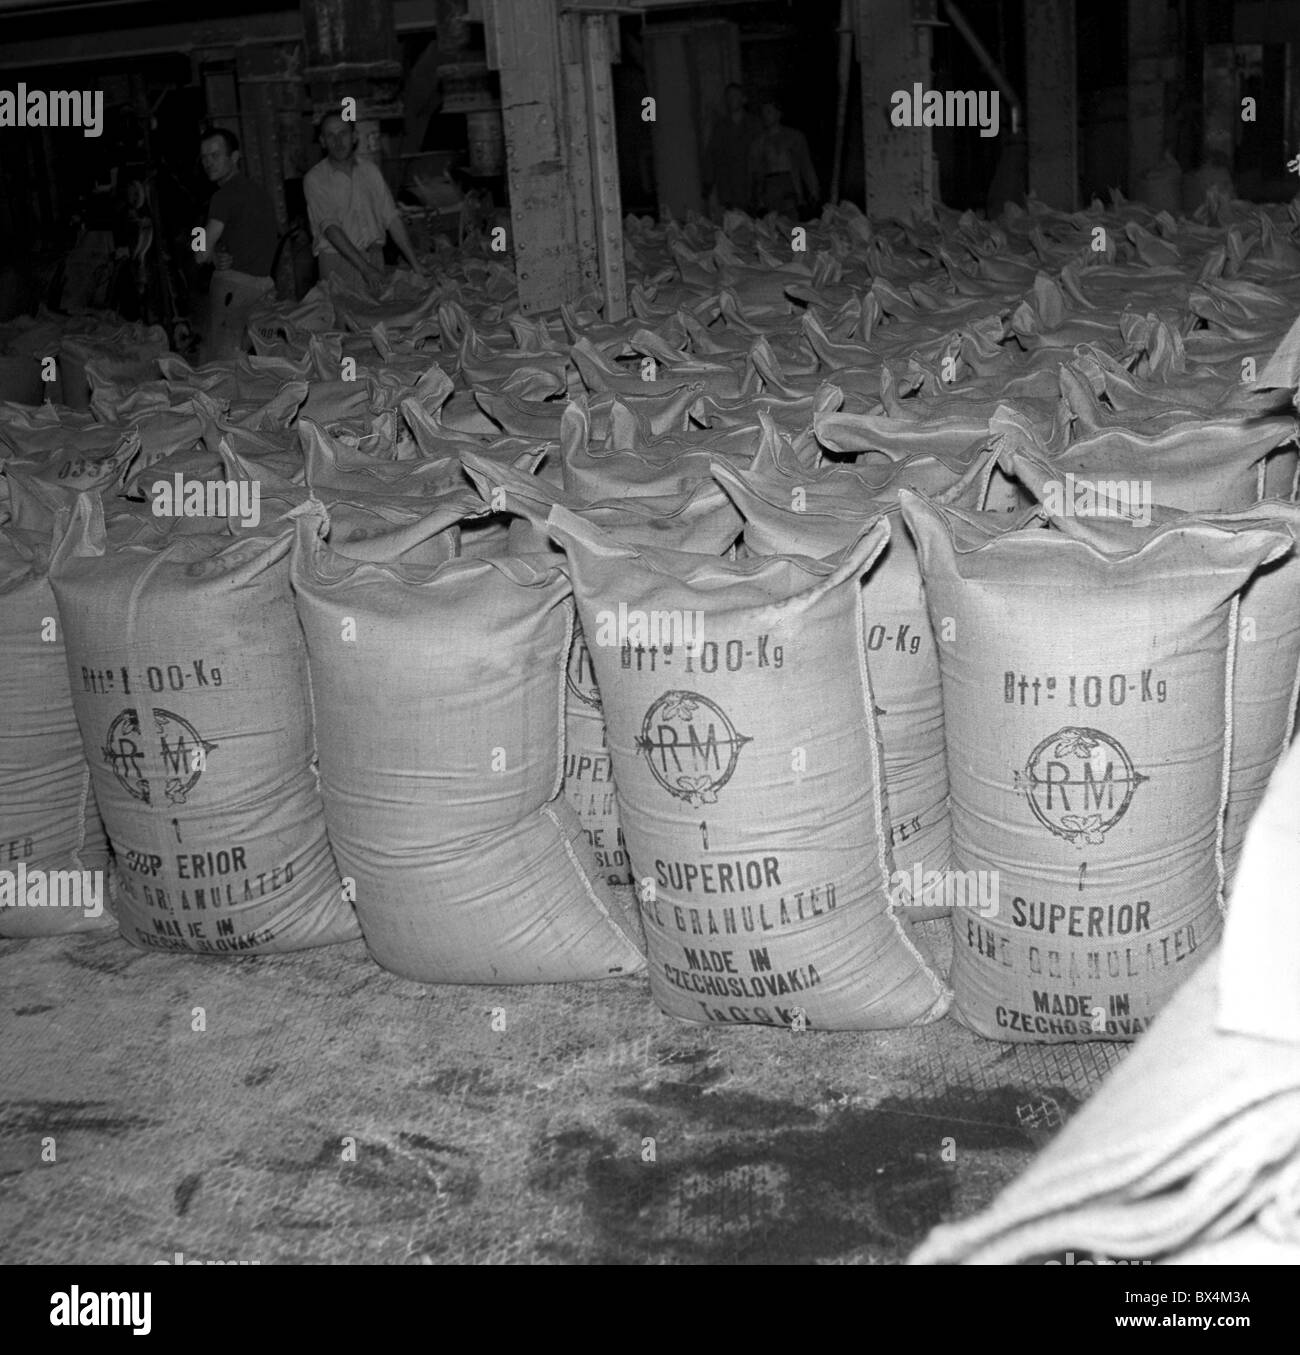 Melnik - Czechoslovakia, 1950. Refined granulated sugar or 'white gold' is poured into bags before shipping. CTK Vintage Photo Stock Photo